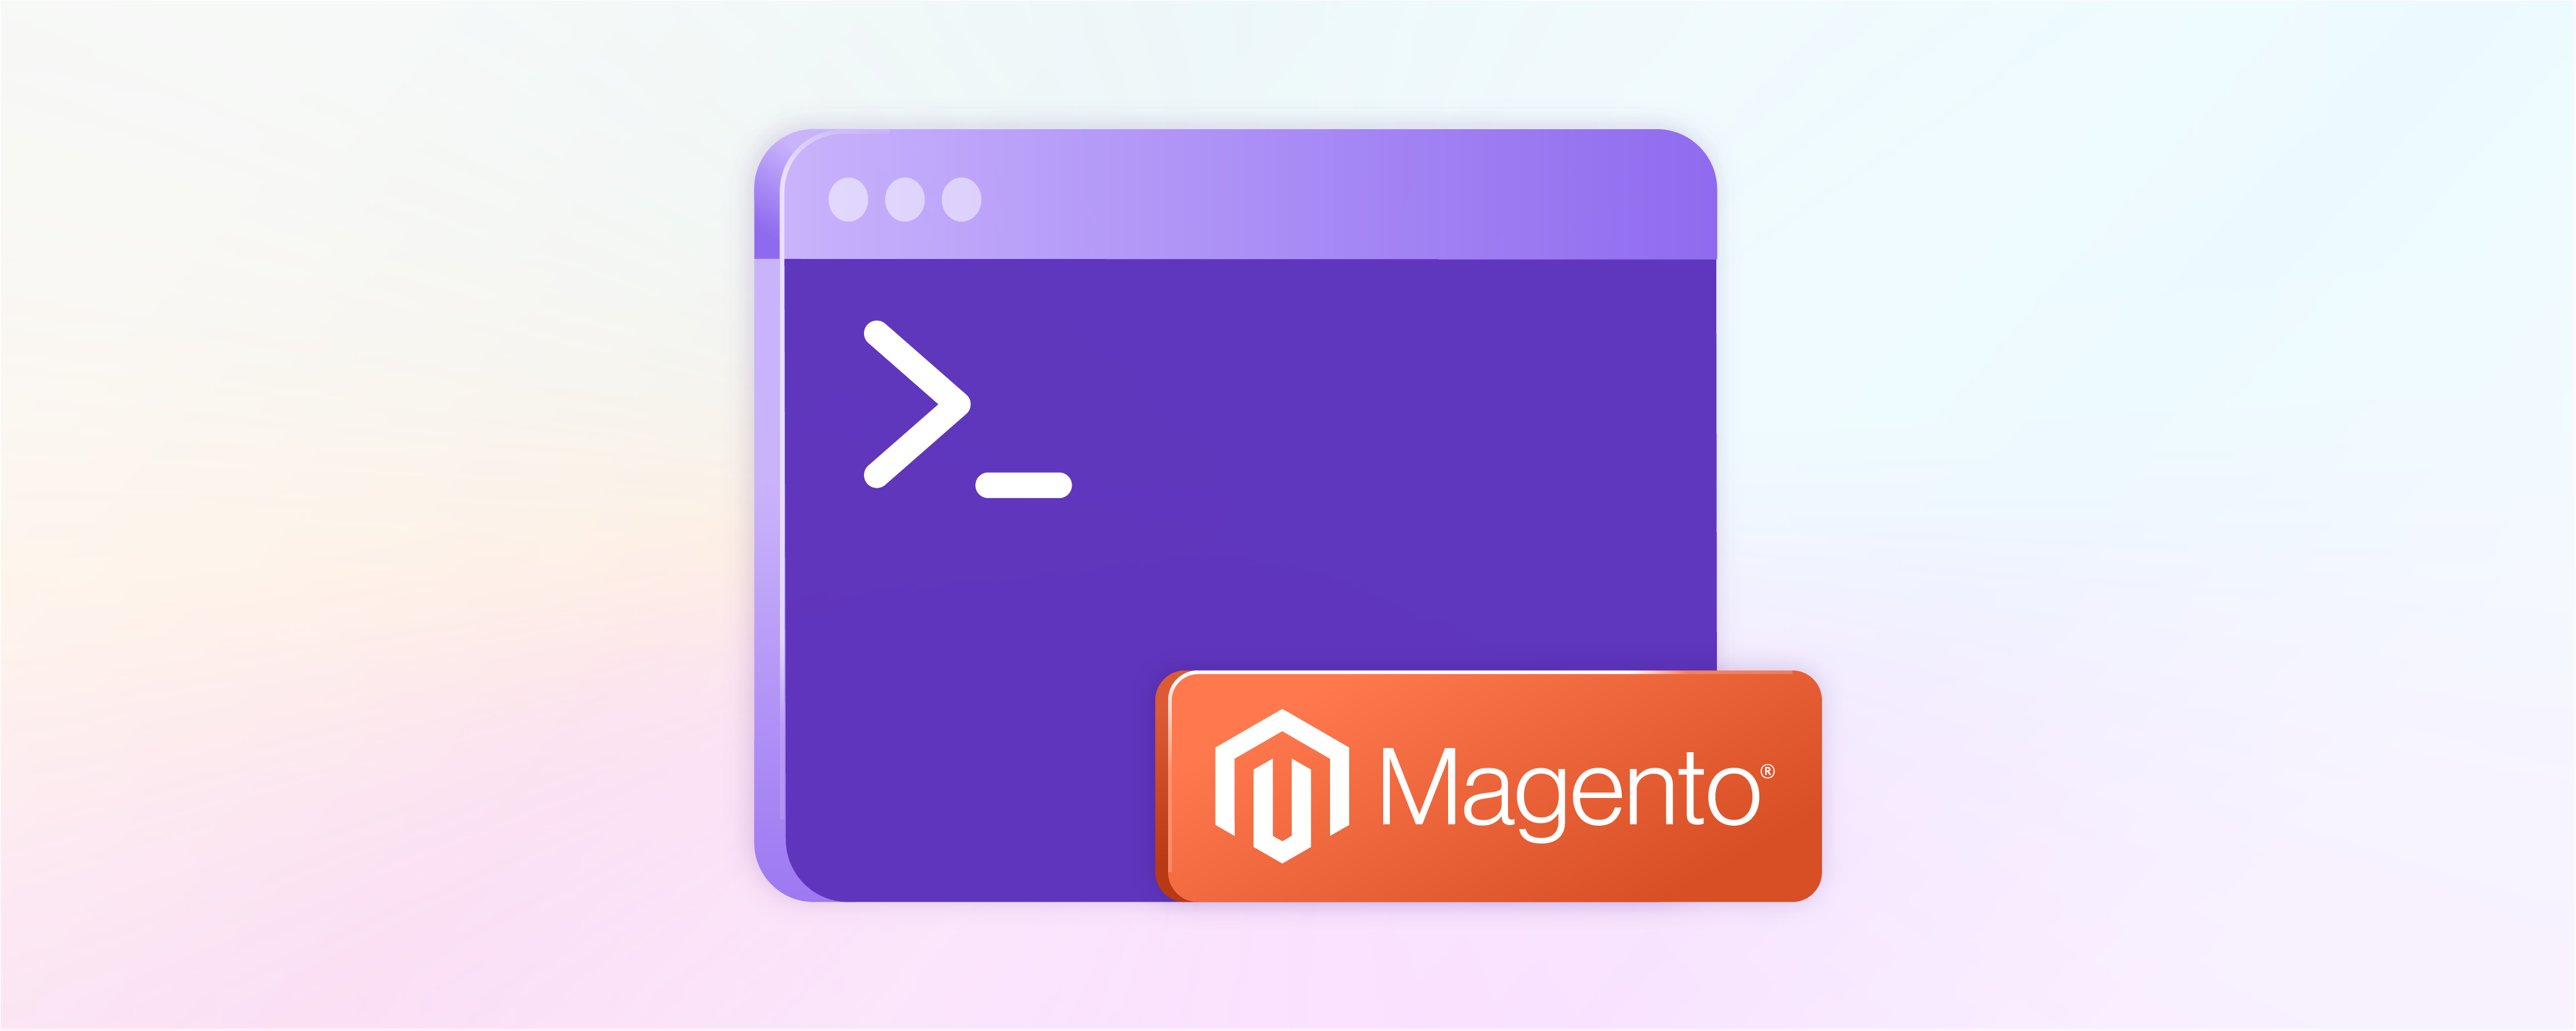 How to Use Magento Command Line Interface (CLI)?